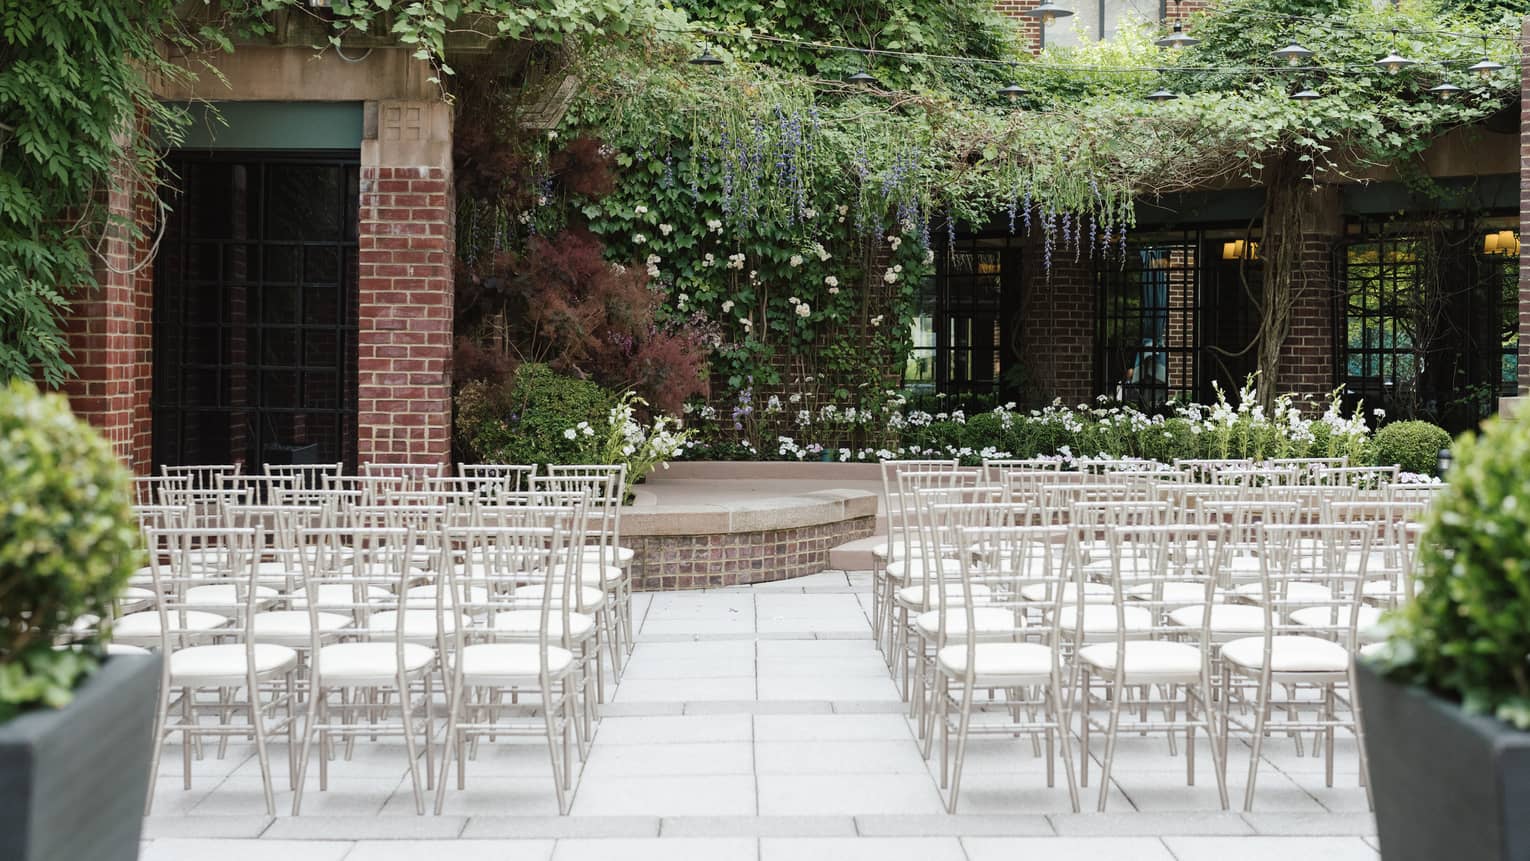 An outdoor venue with rows of white seats and greenery.